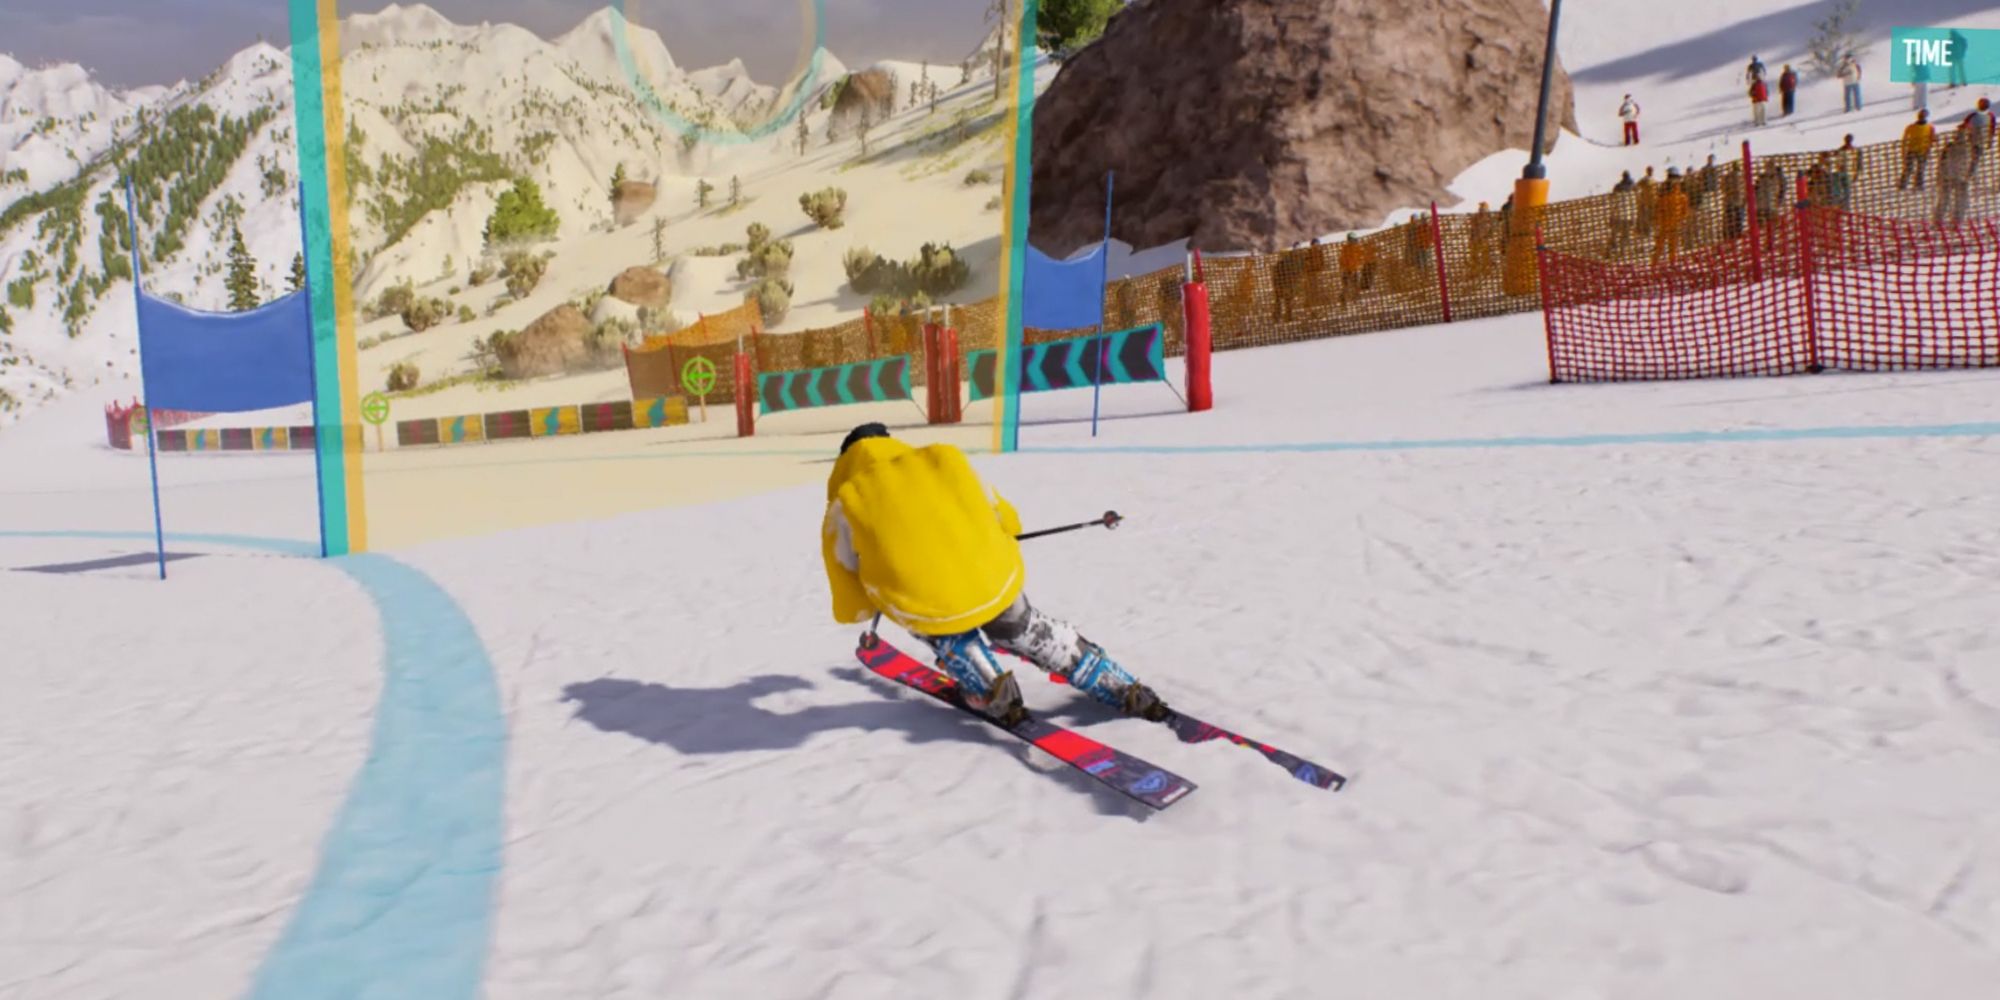 Riders Republic. Yellow jacket riding on red skis in the snow. Checkpoint ahead.